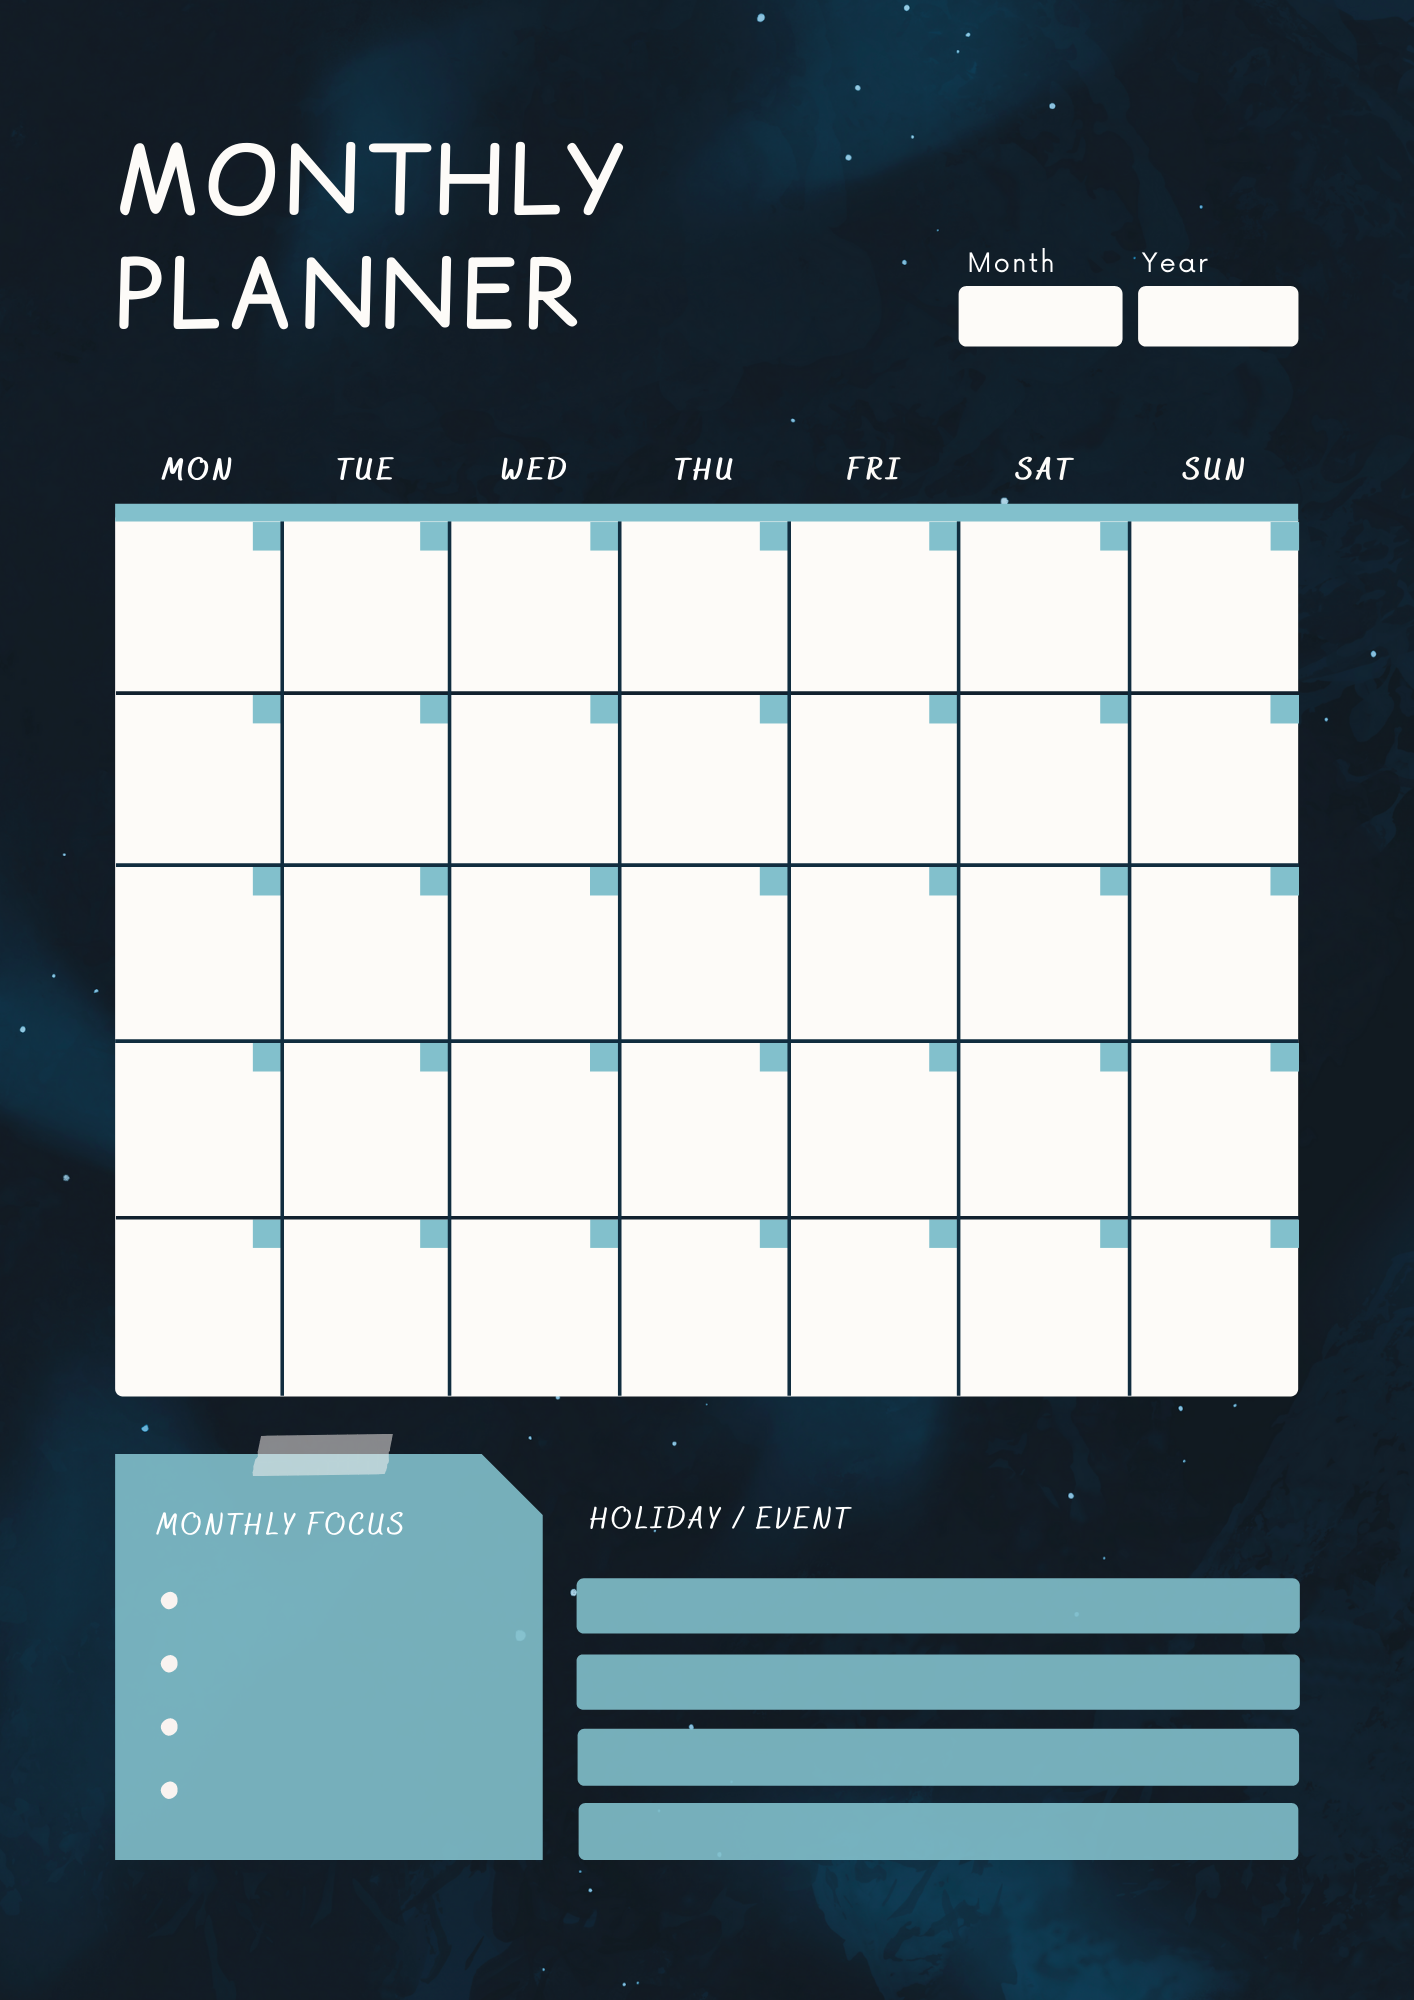 Among Stars – Monthly Planner